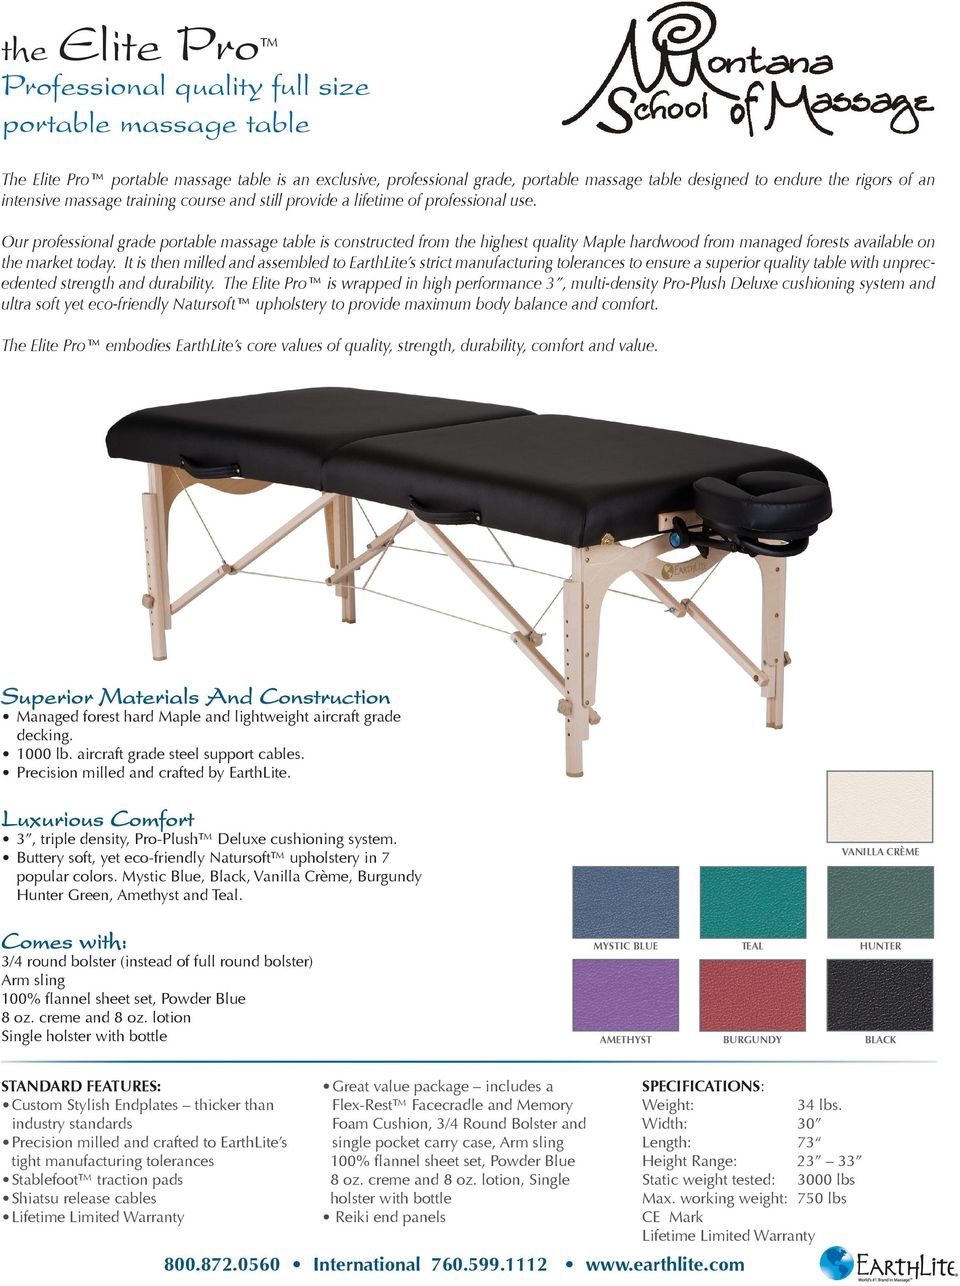 Our professional grade portable massage table is constructed from the highest quality Maple hardwood from managed forests available on the market today.